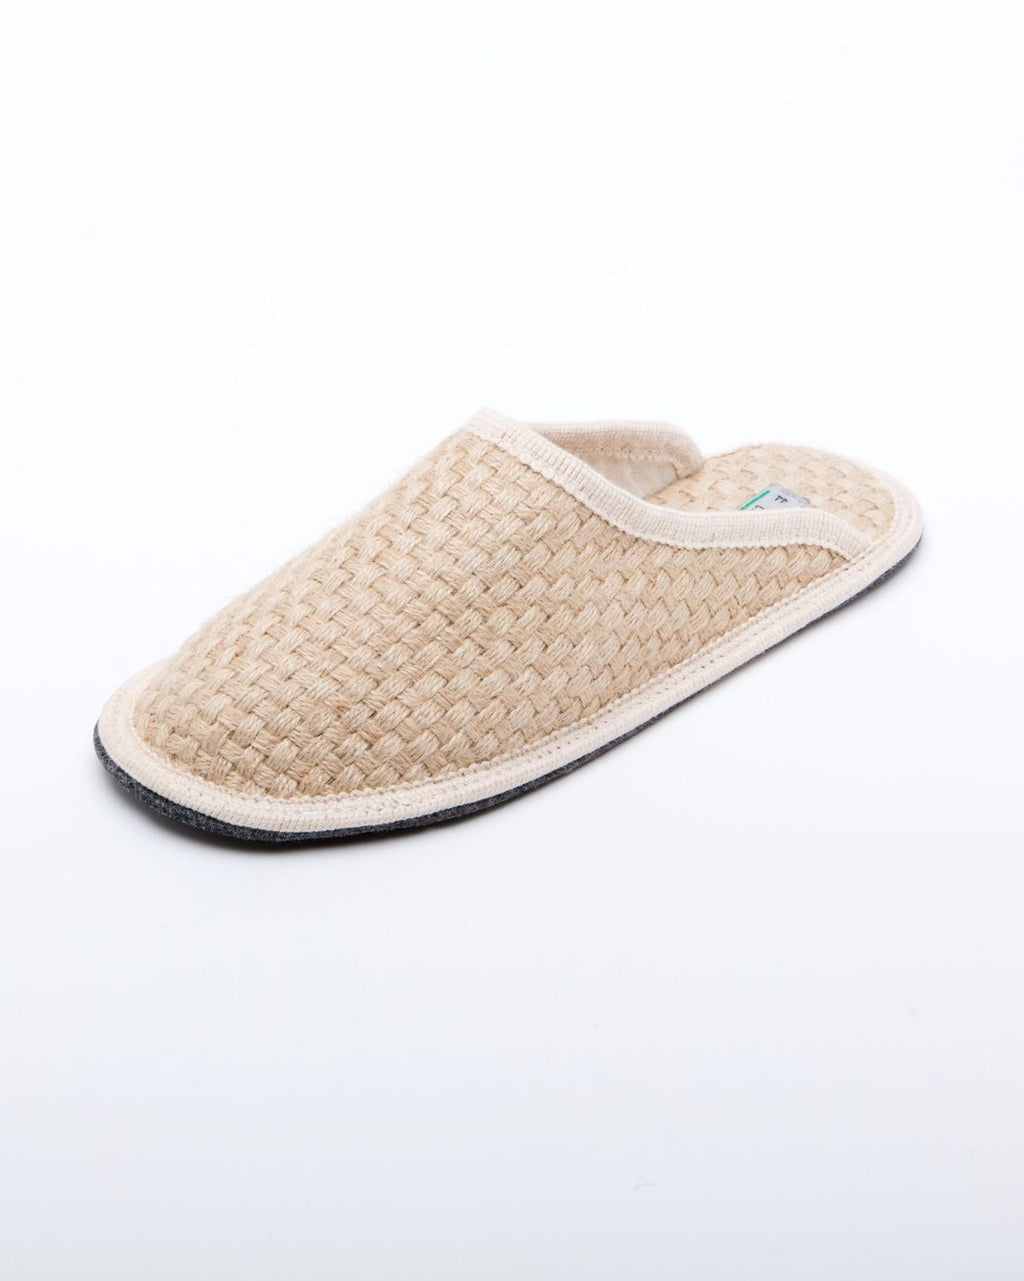 Le Clare Men's Wool & Hemp Slippers Made in Italy  Italian Slippers Shop –  The Italian Slippers Shop